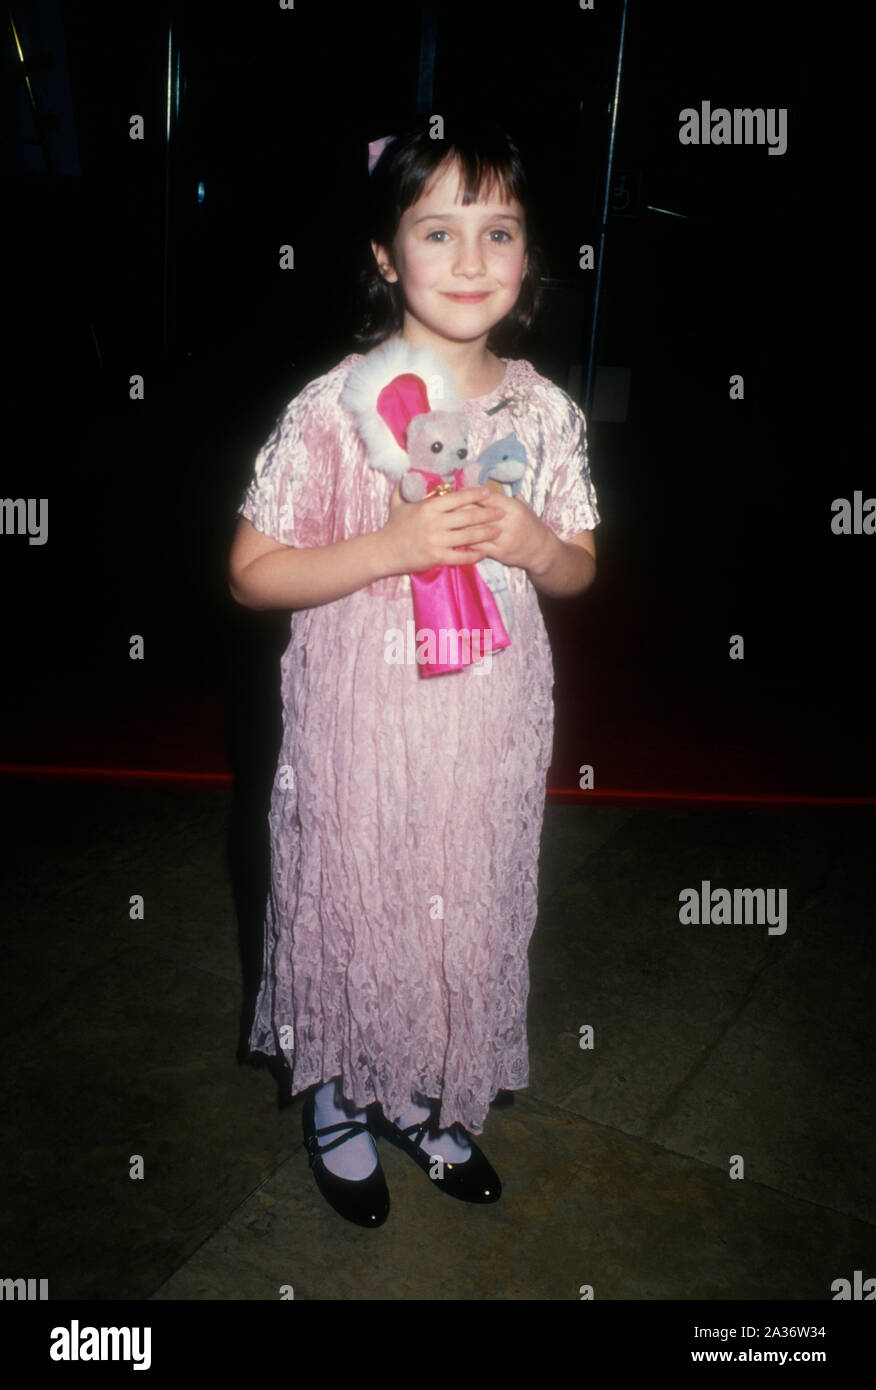 Beverly Hills, California, USA 21st January 1995 Actress Mara Wilson attends the 52nd Annual Golden Globe Awards on January 21, 1995 at the Beverly Hilton Hotel in Beverly Hills, California, USA. Photo by Barry King/Alamy Stock Photo Stock Photo